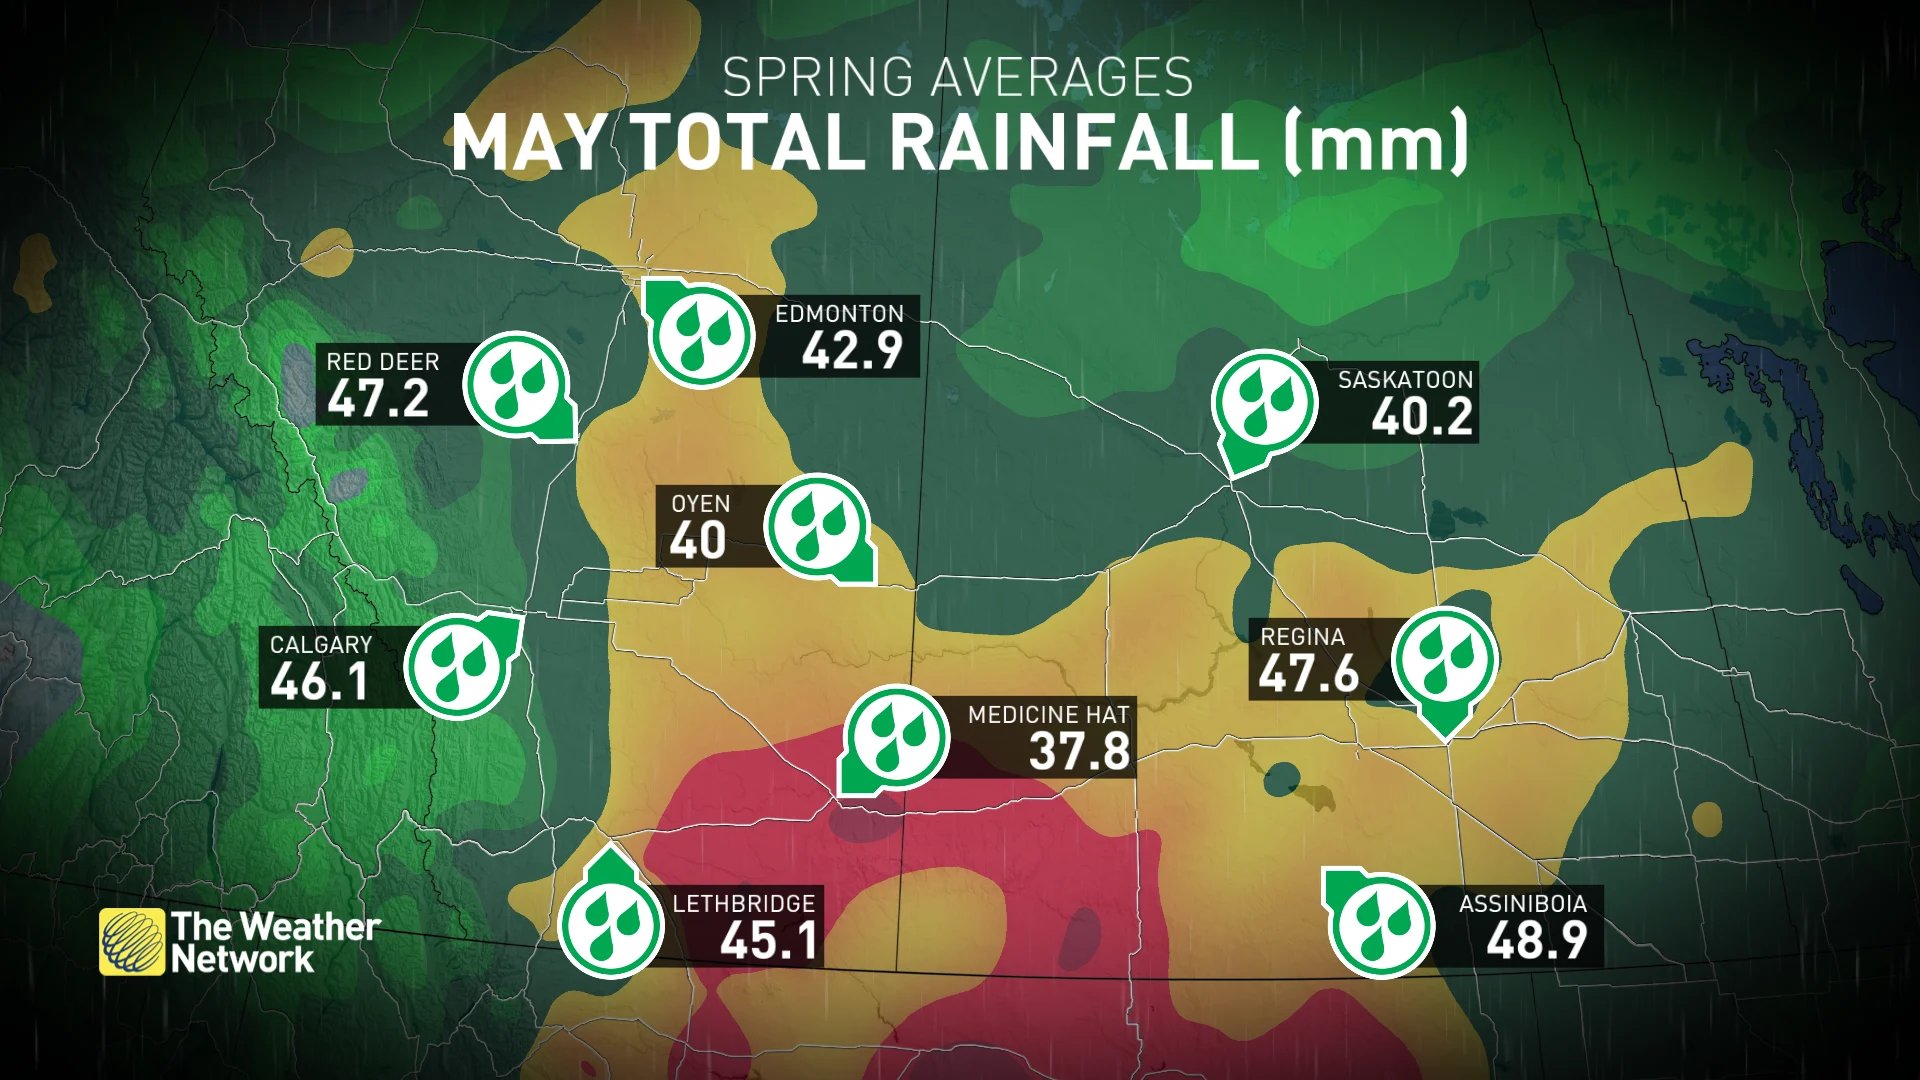 May total rainfall averages on the Prairies